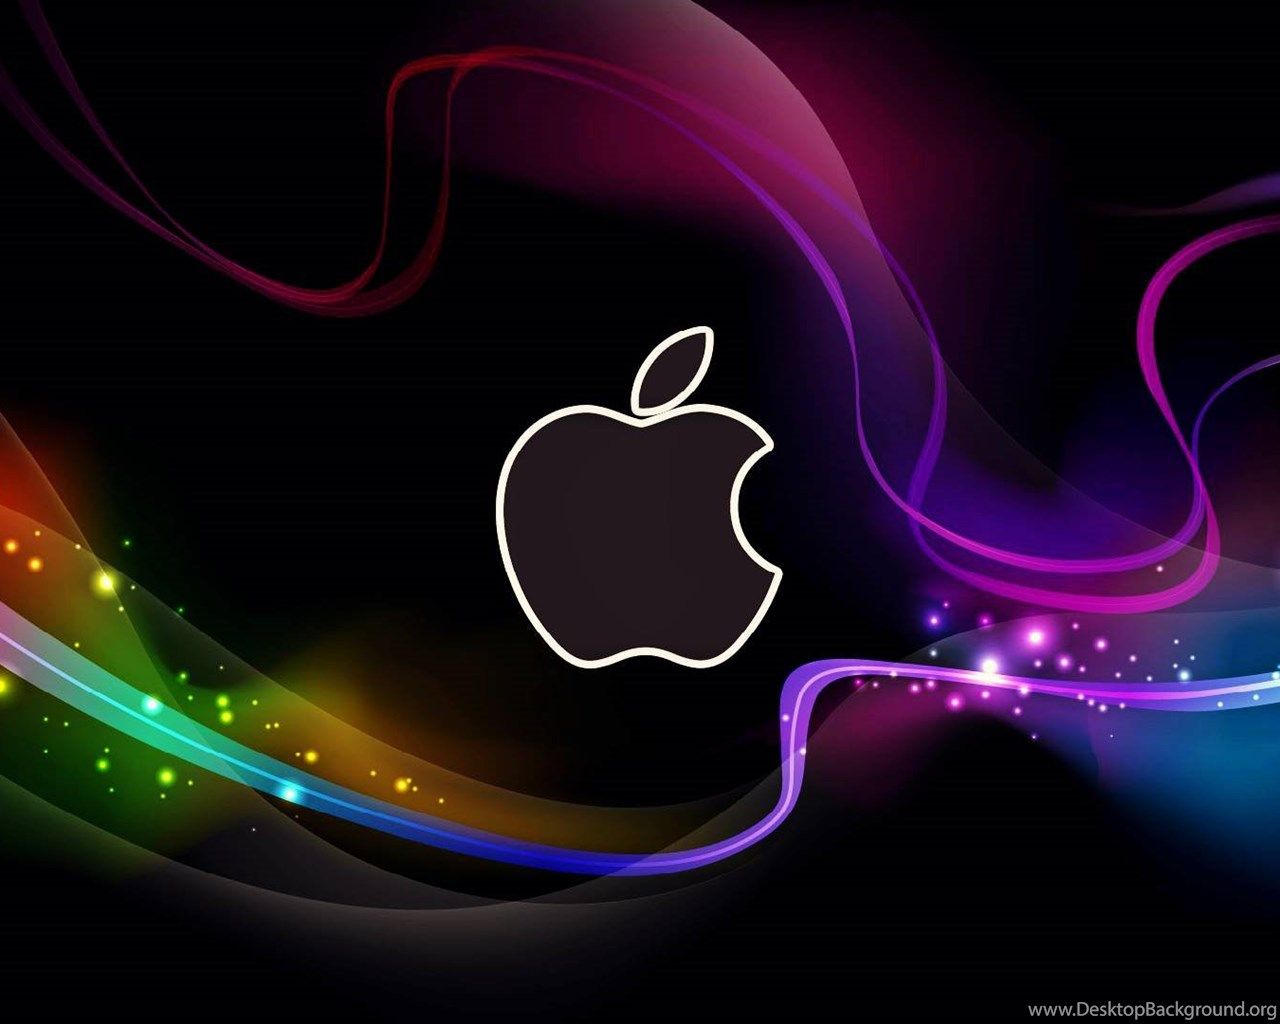 Apple Company Wallpapers - Wallpaper Cave